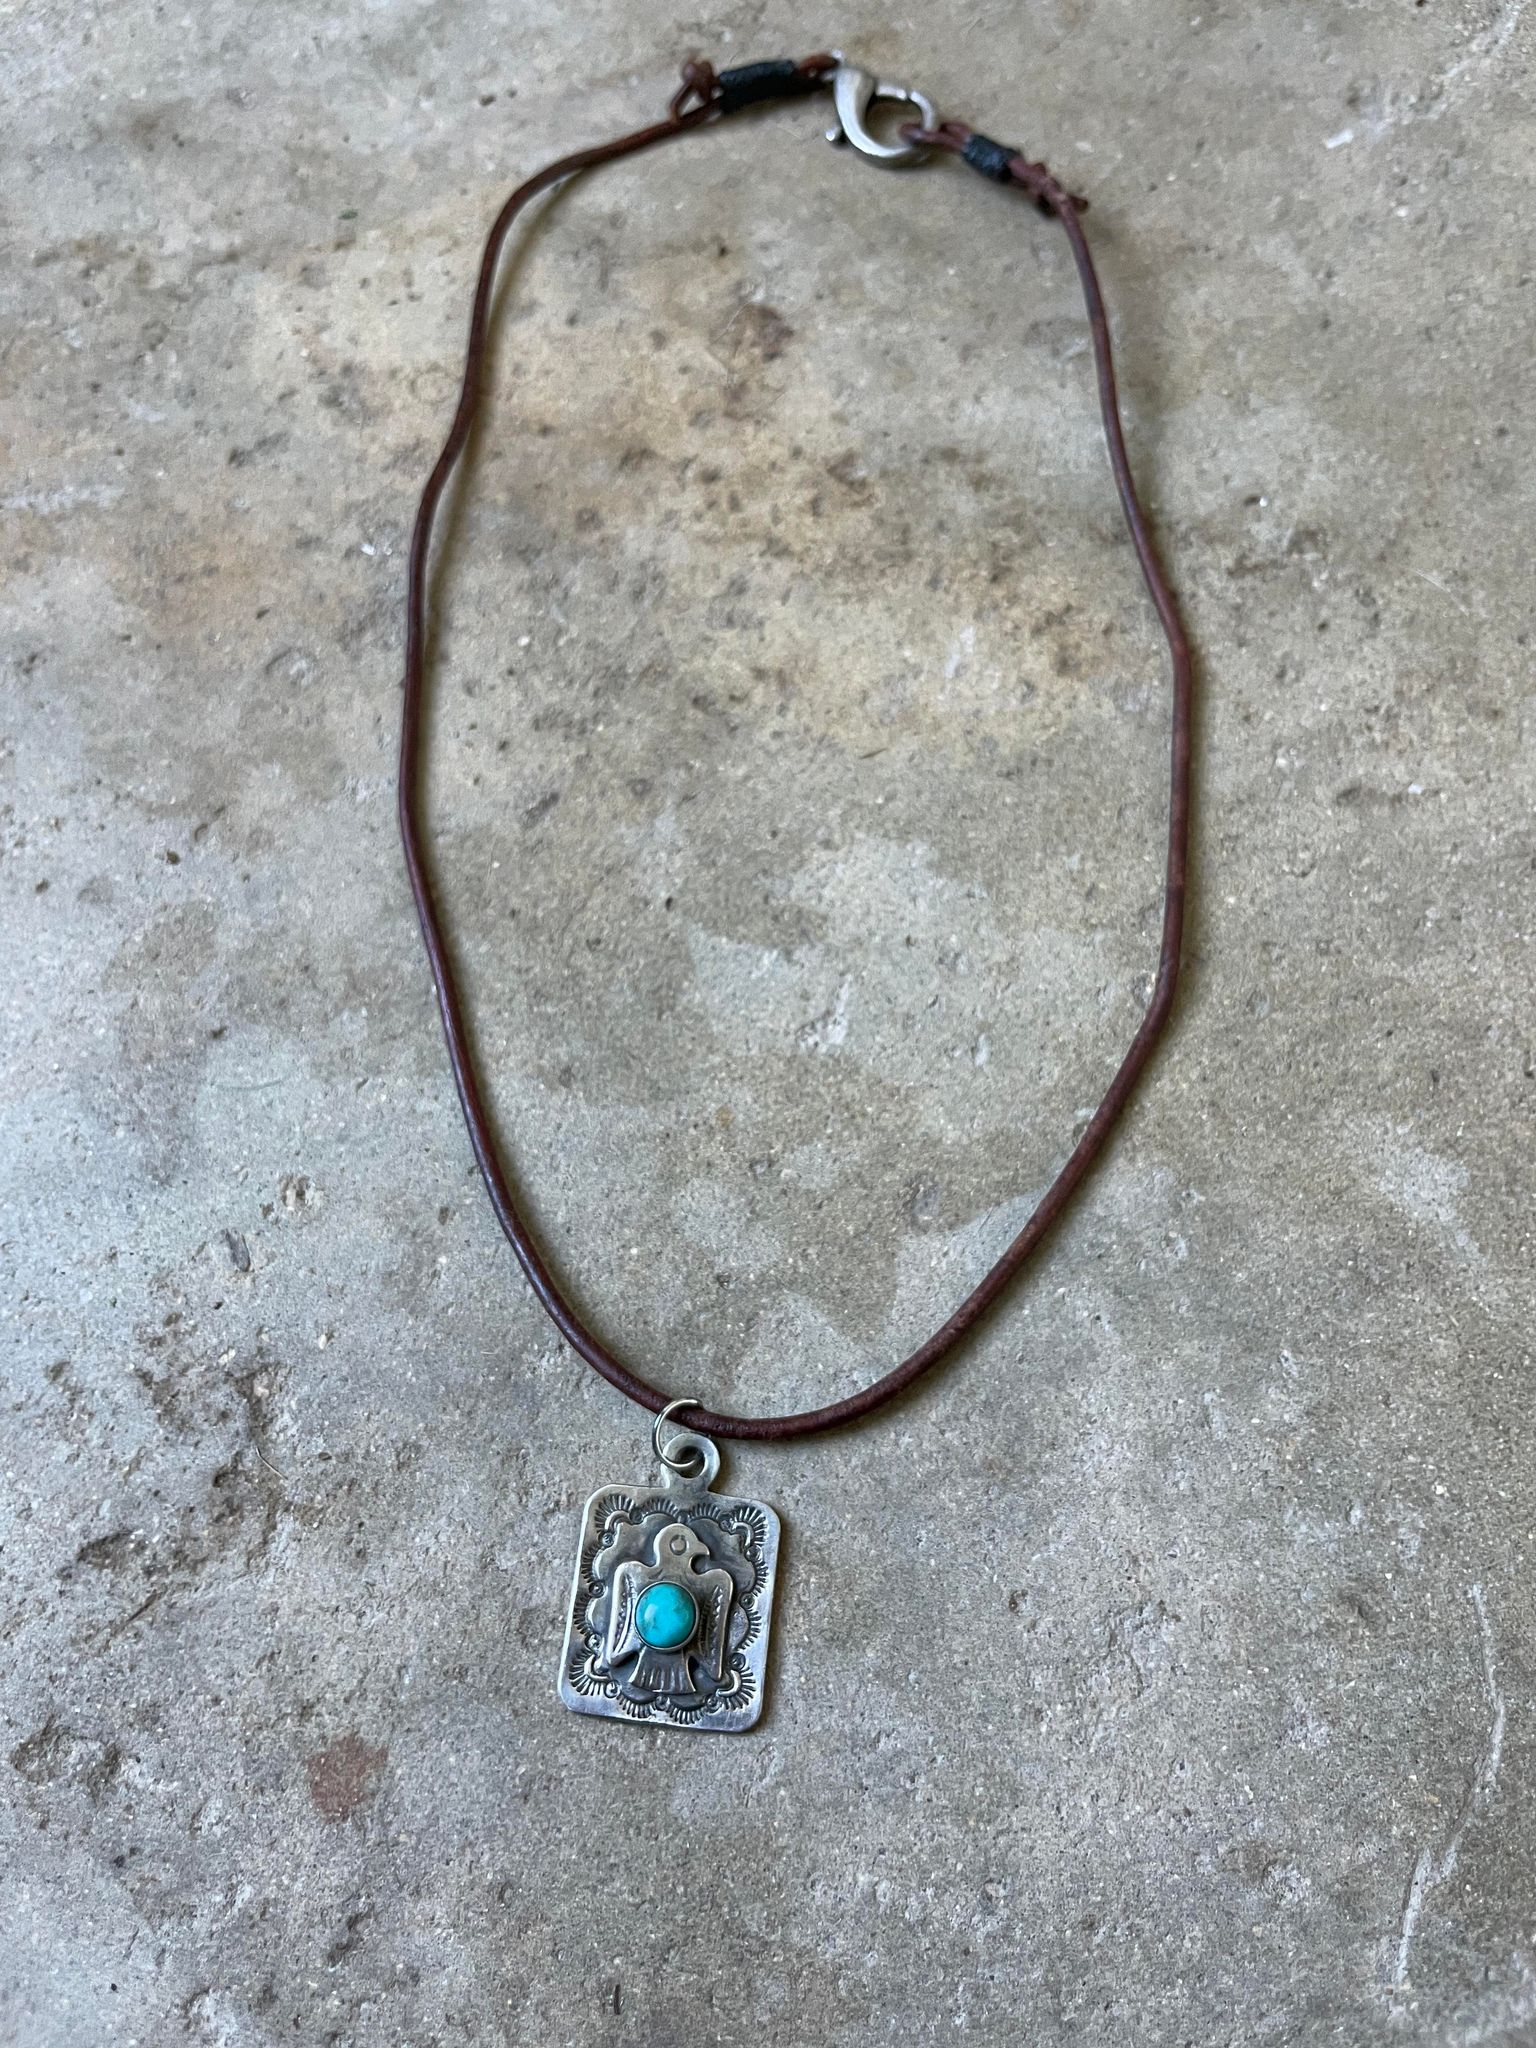 Thunderbird Necklace with Turquoise